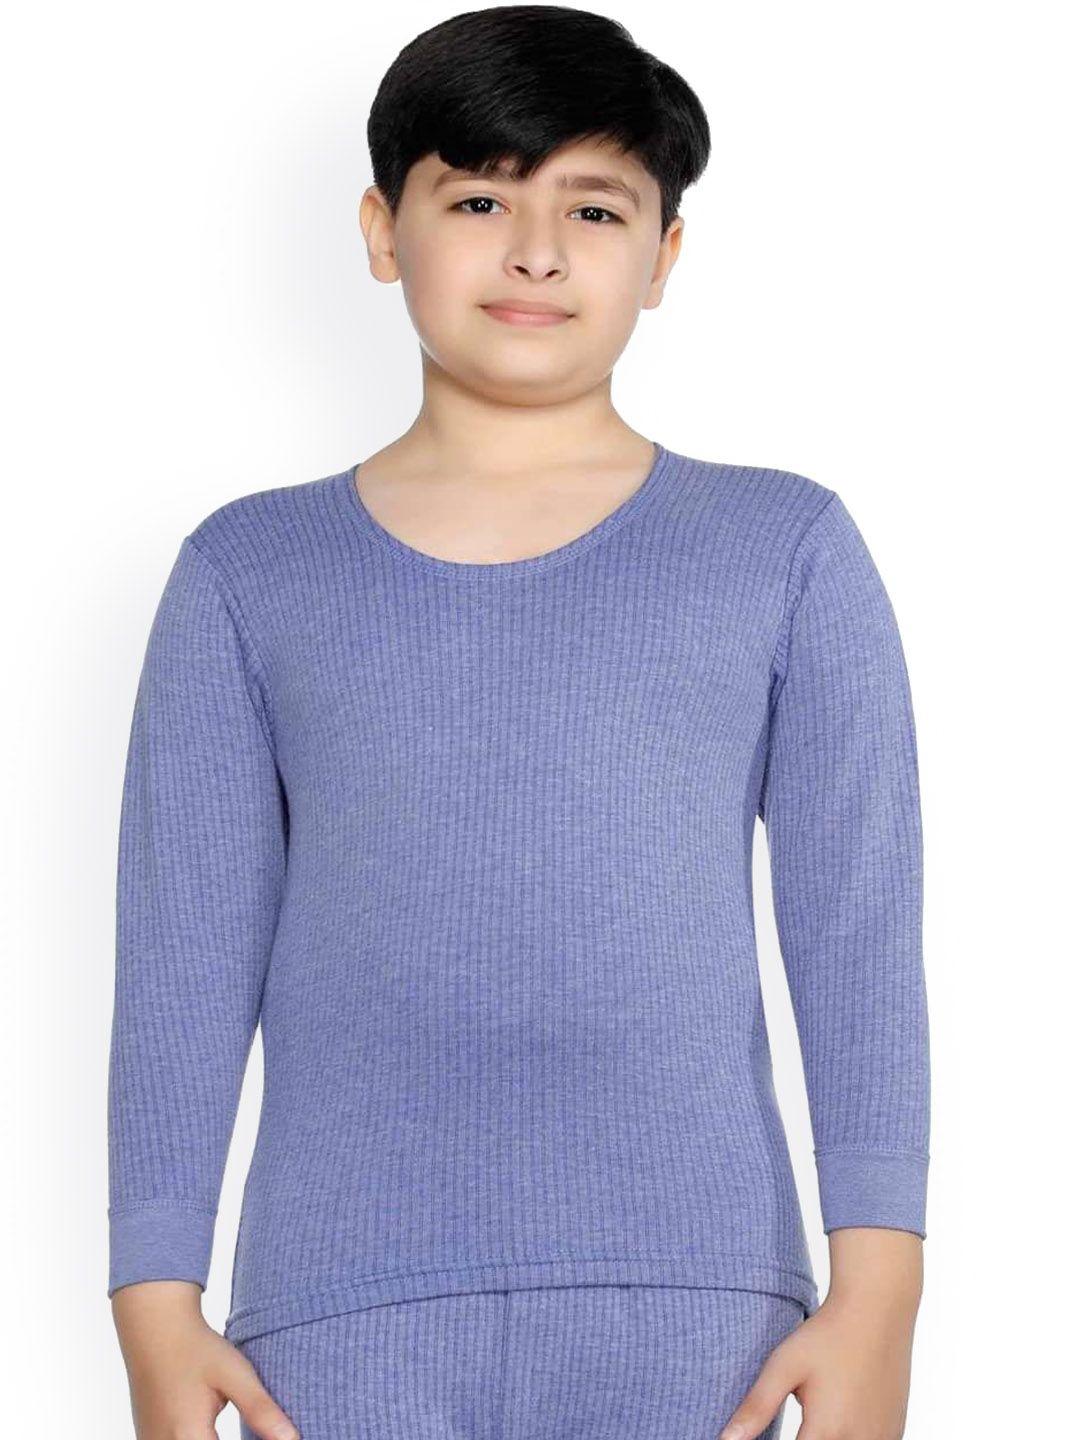 bodycare kids boys blue solid cotton thermal tops